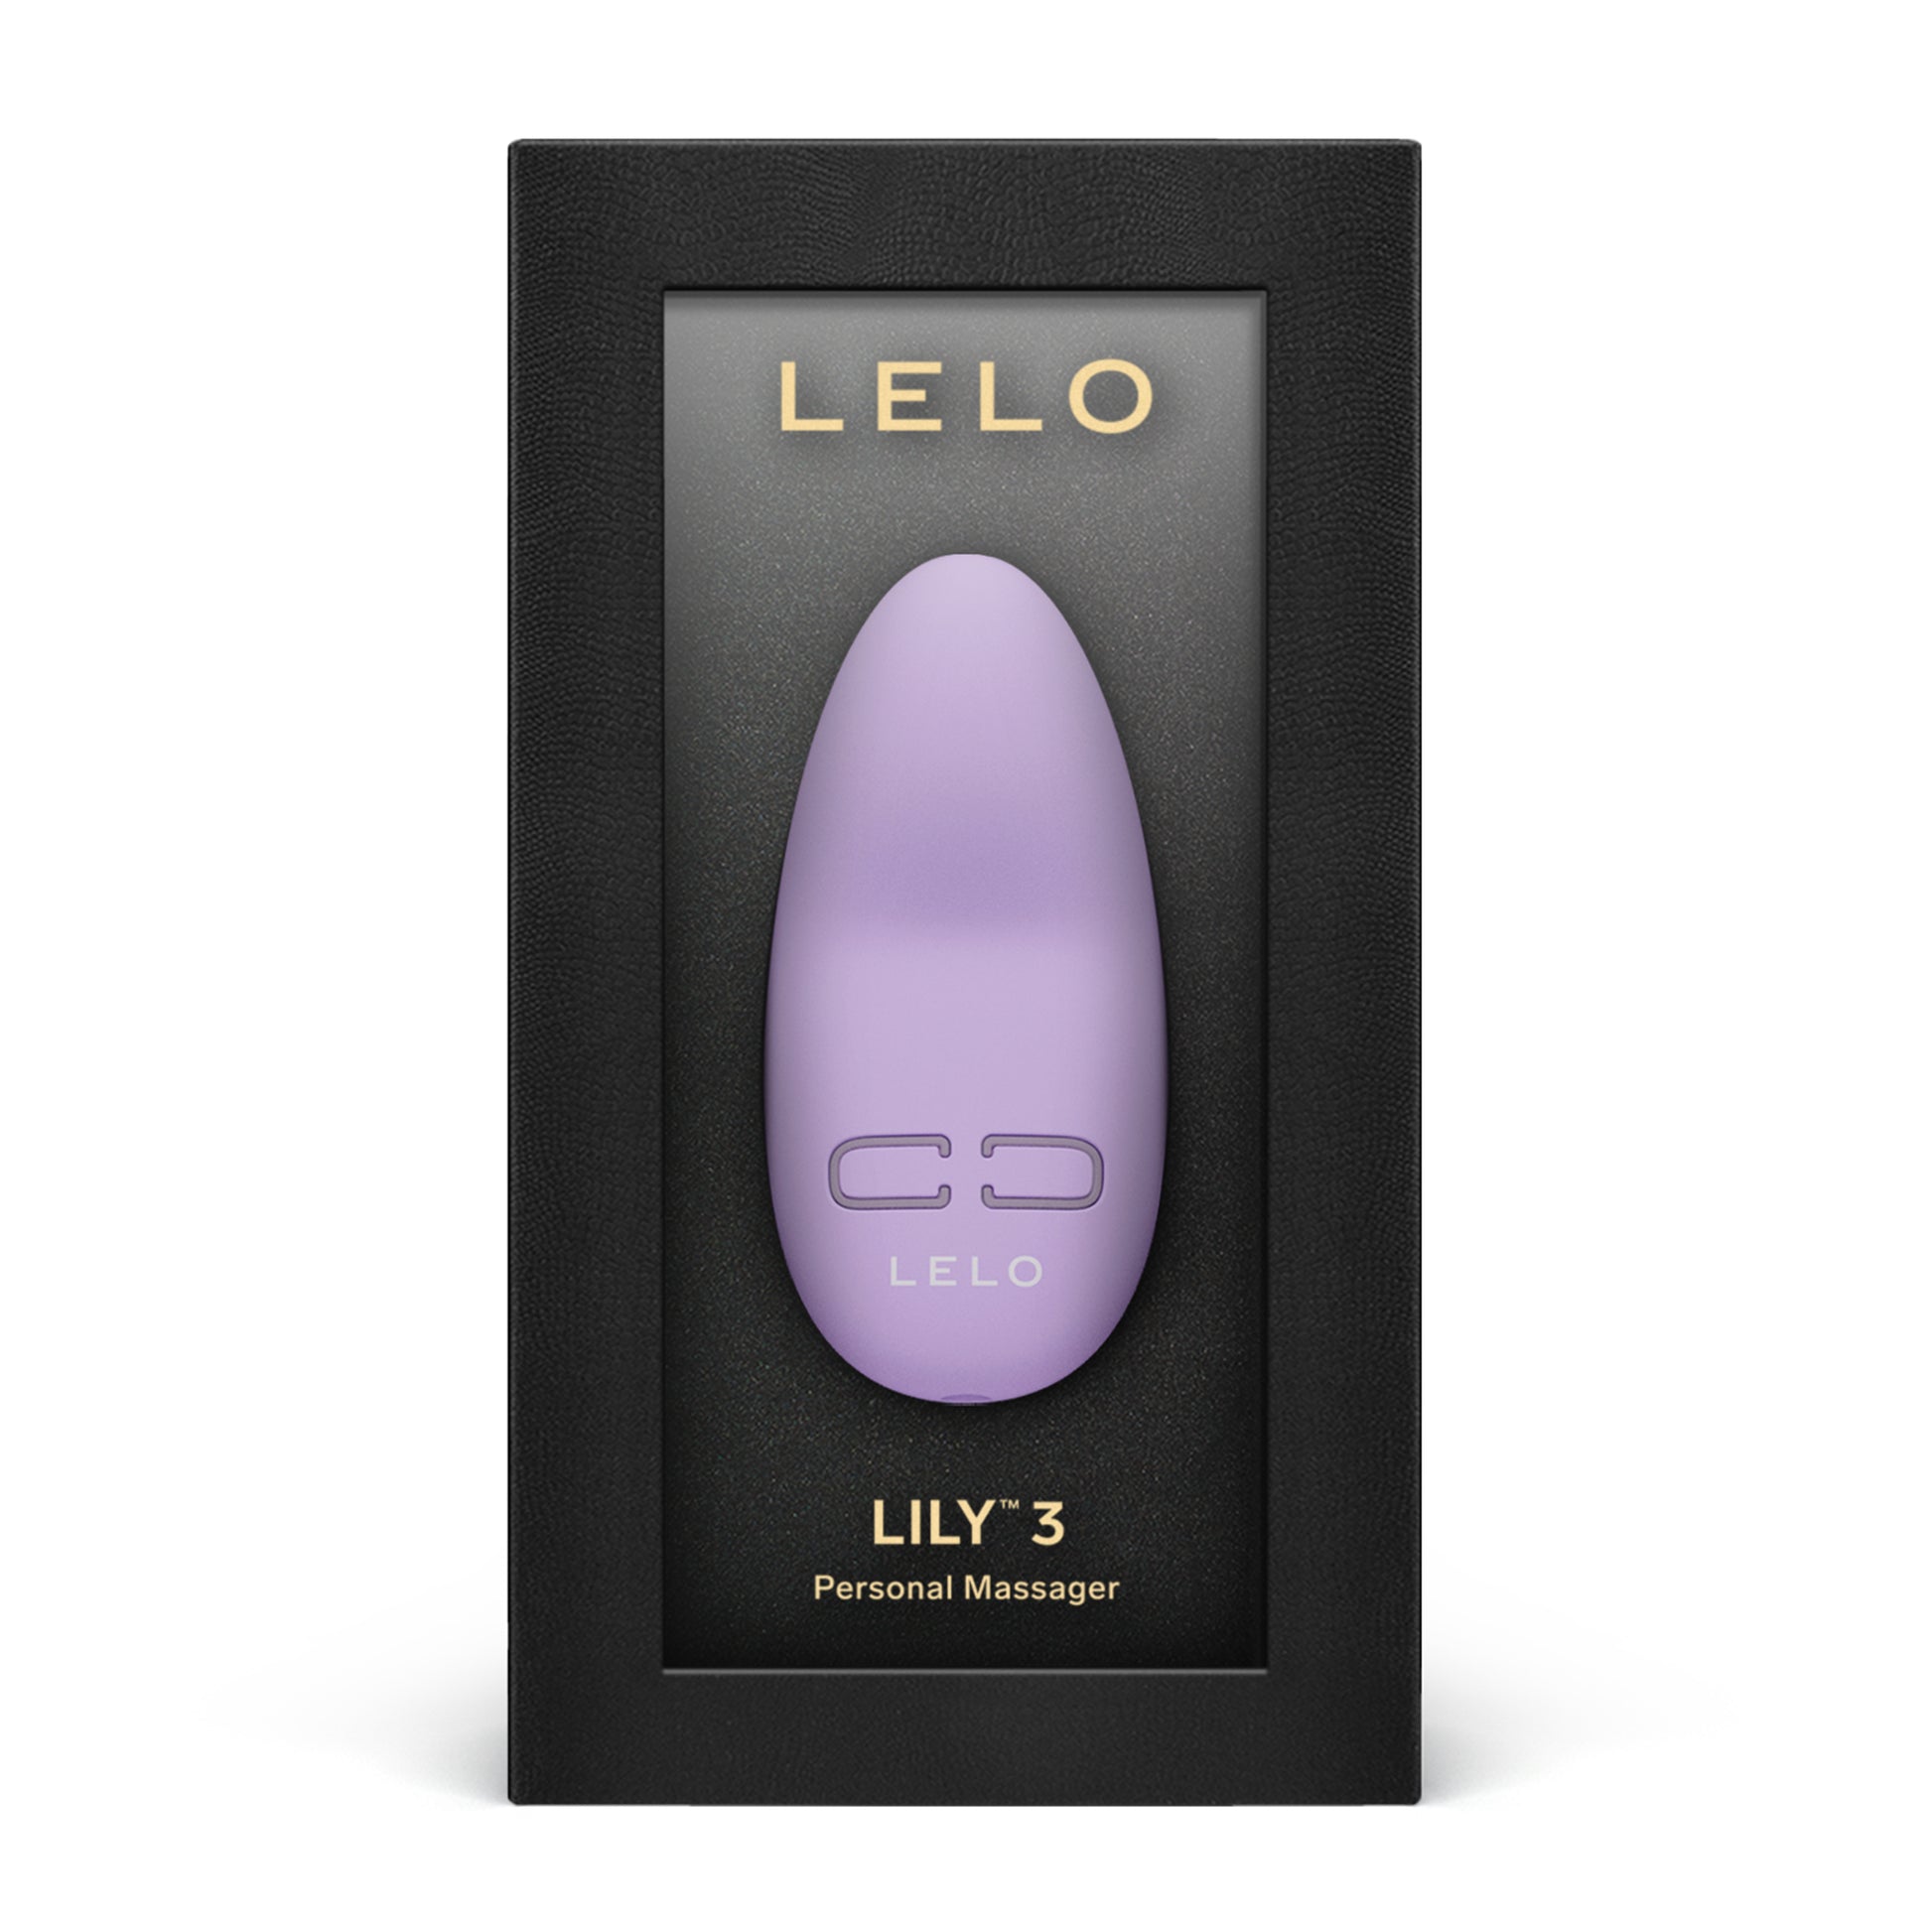 Lelo - Lily 3 Personal Massager Calm Lavender - 2